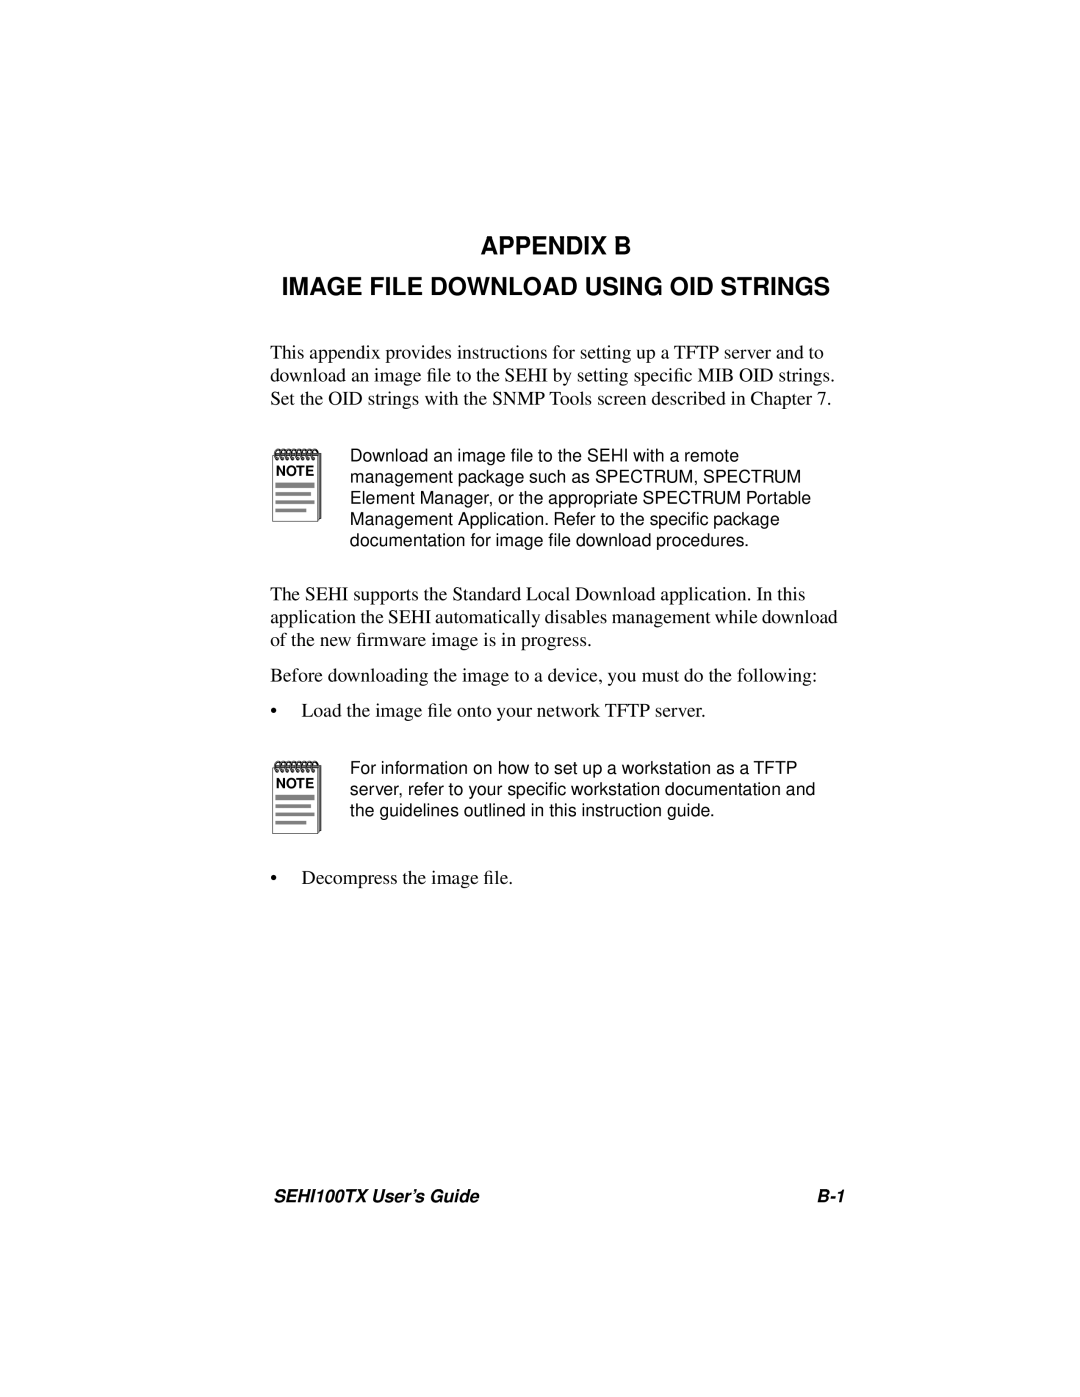 Cabletron Systems SEHI100TX-22 manual Appendix B Image File Download Using Oid Strings 